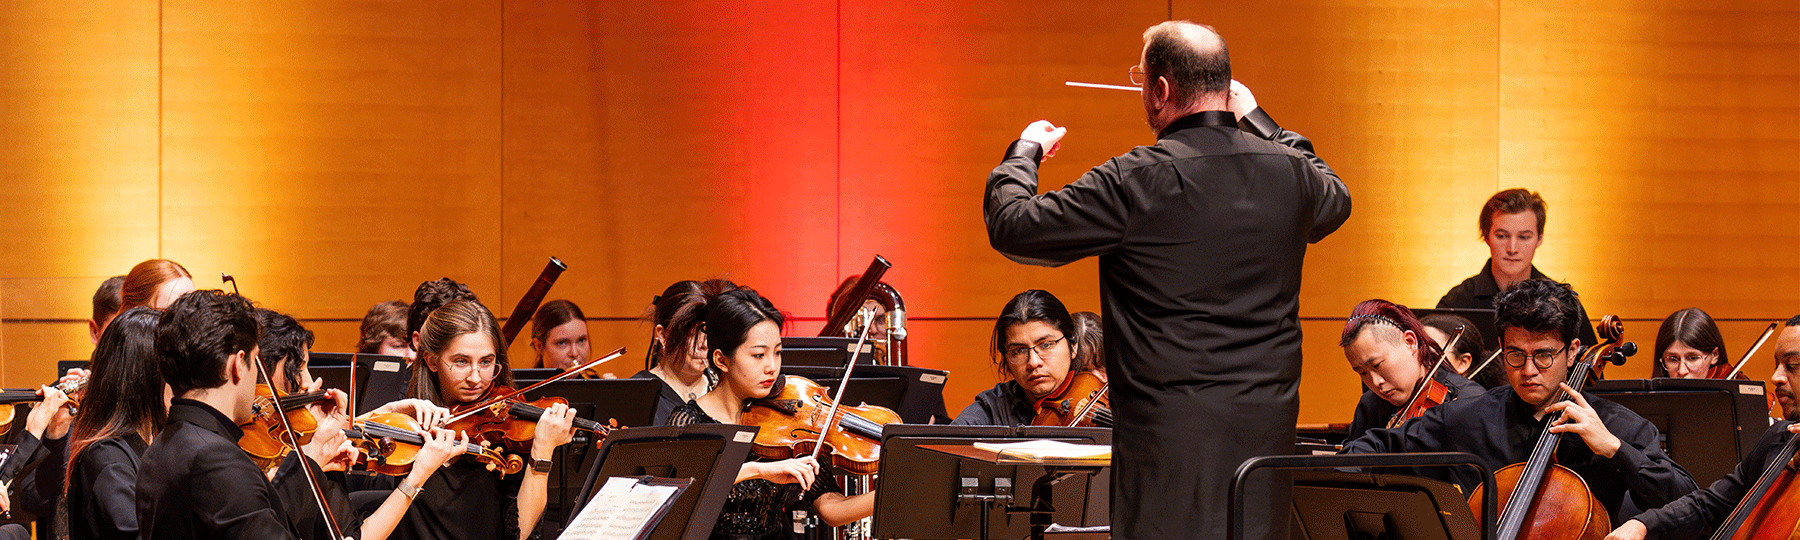 A conductor stands on stage while a group of students play instruments on stage during a performance.